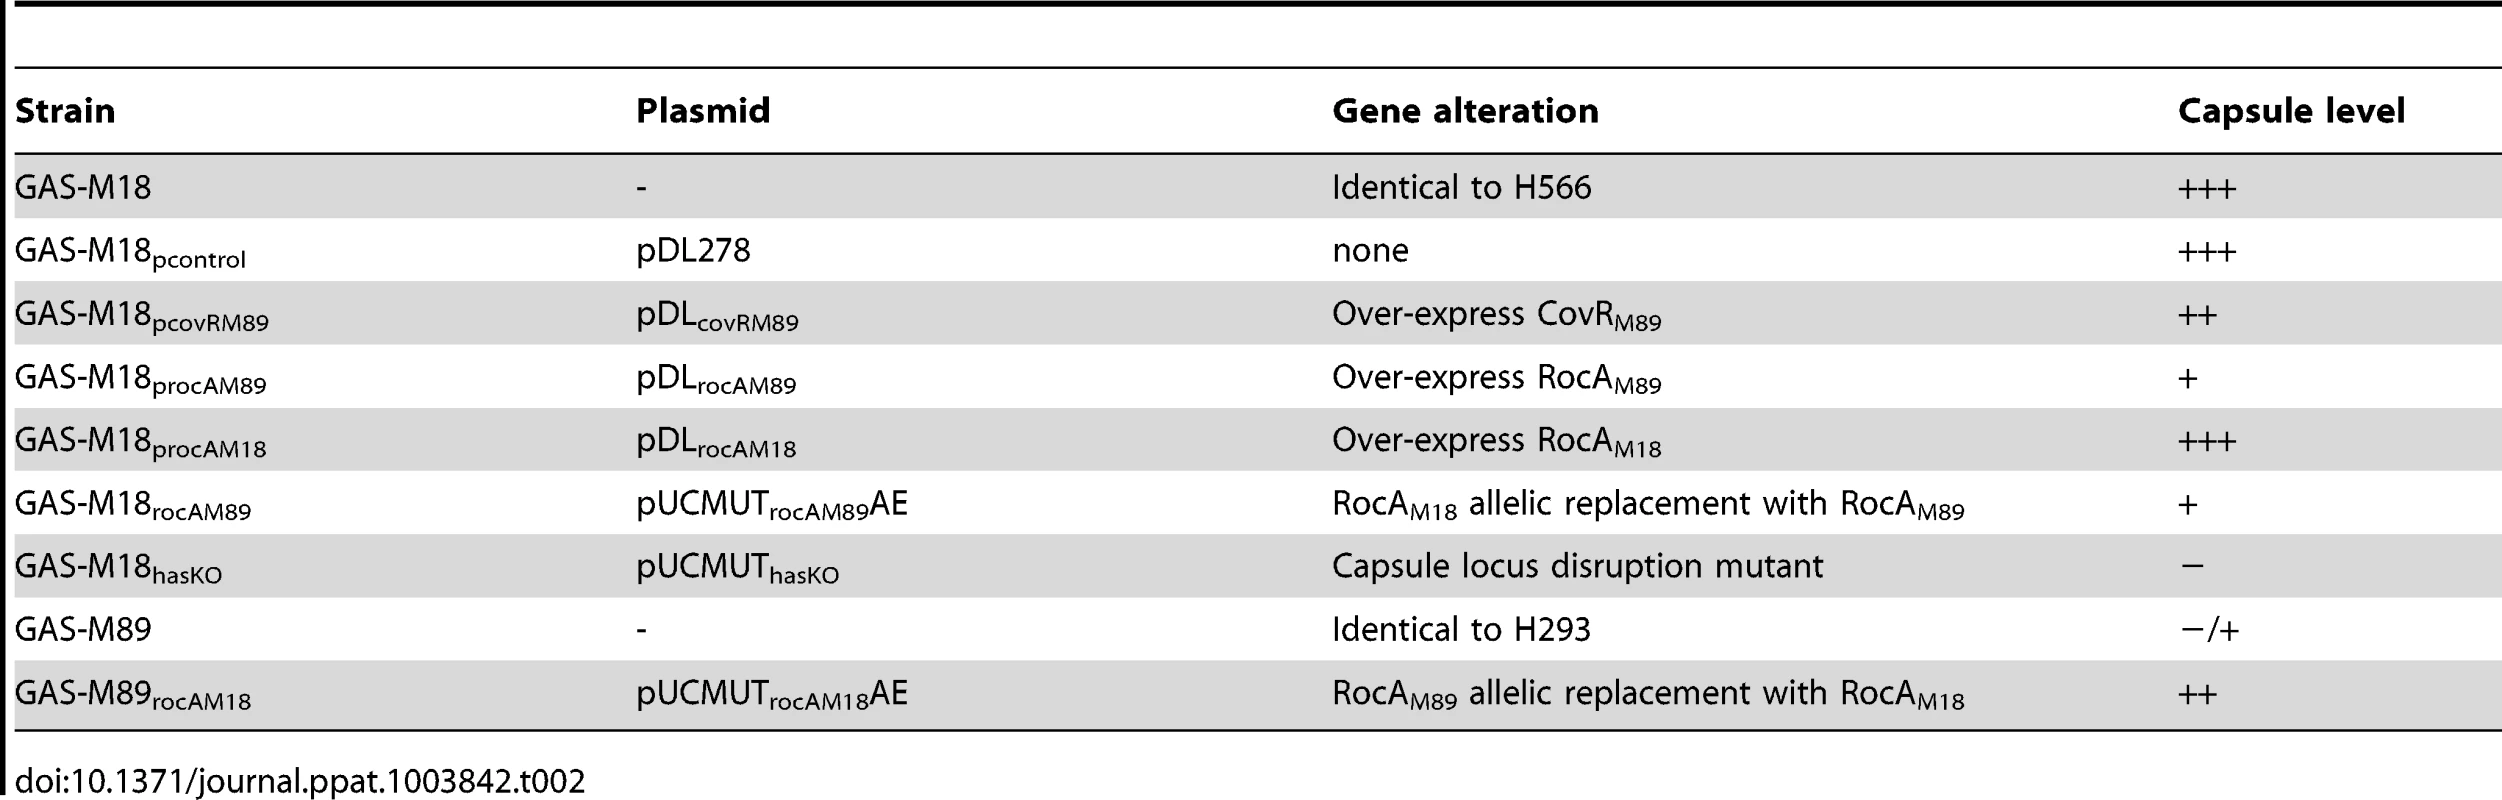 Isogenic strains used in this study.